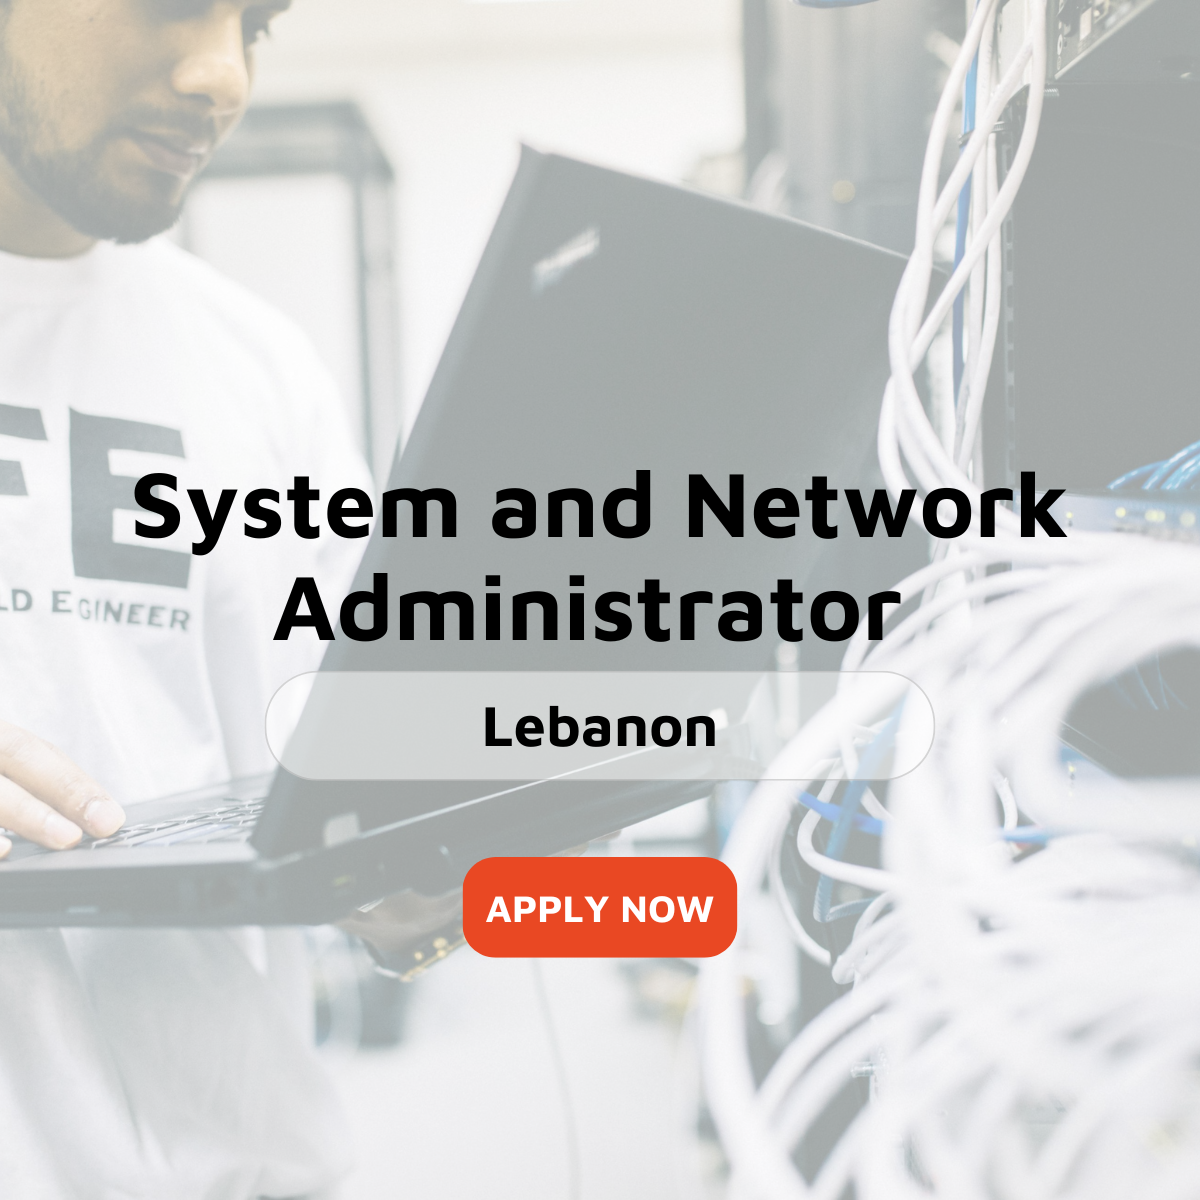 System and Network Administrator